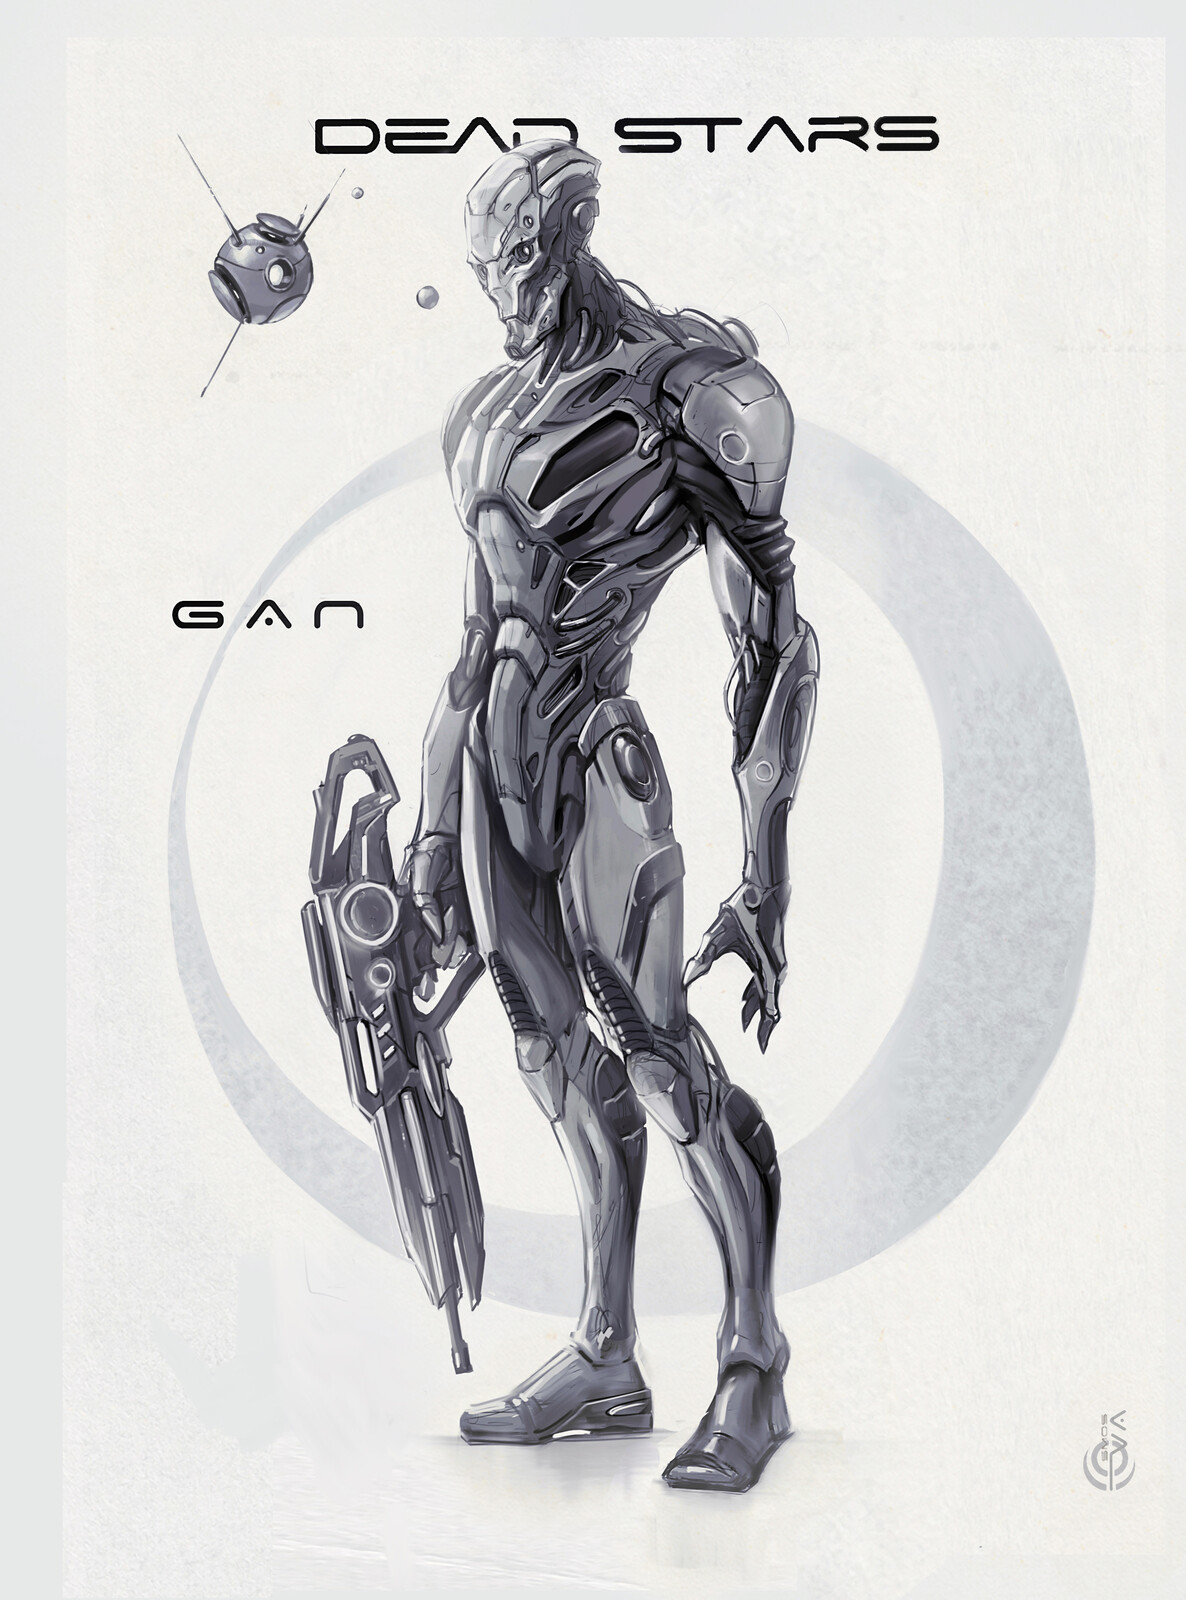 Design and concept of the character Gan, for my personal project Dead Stars.